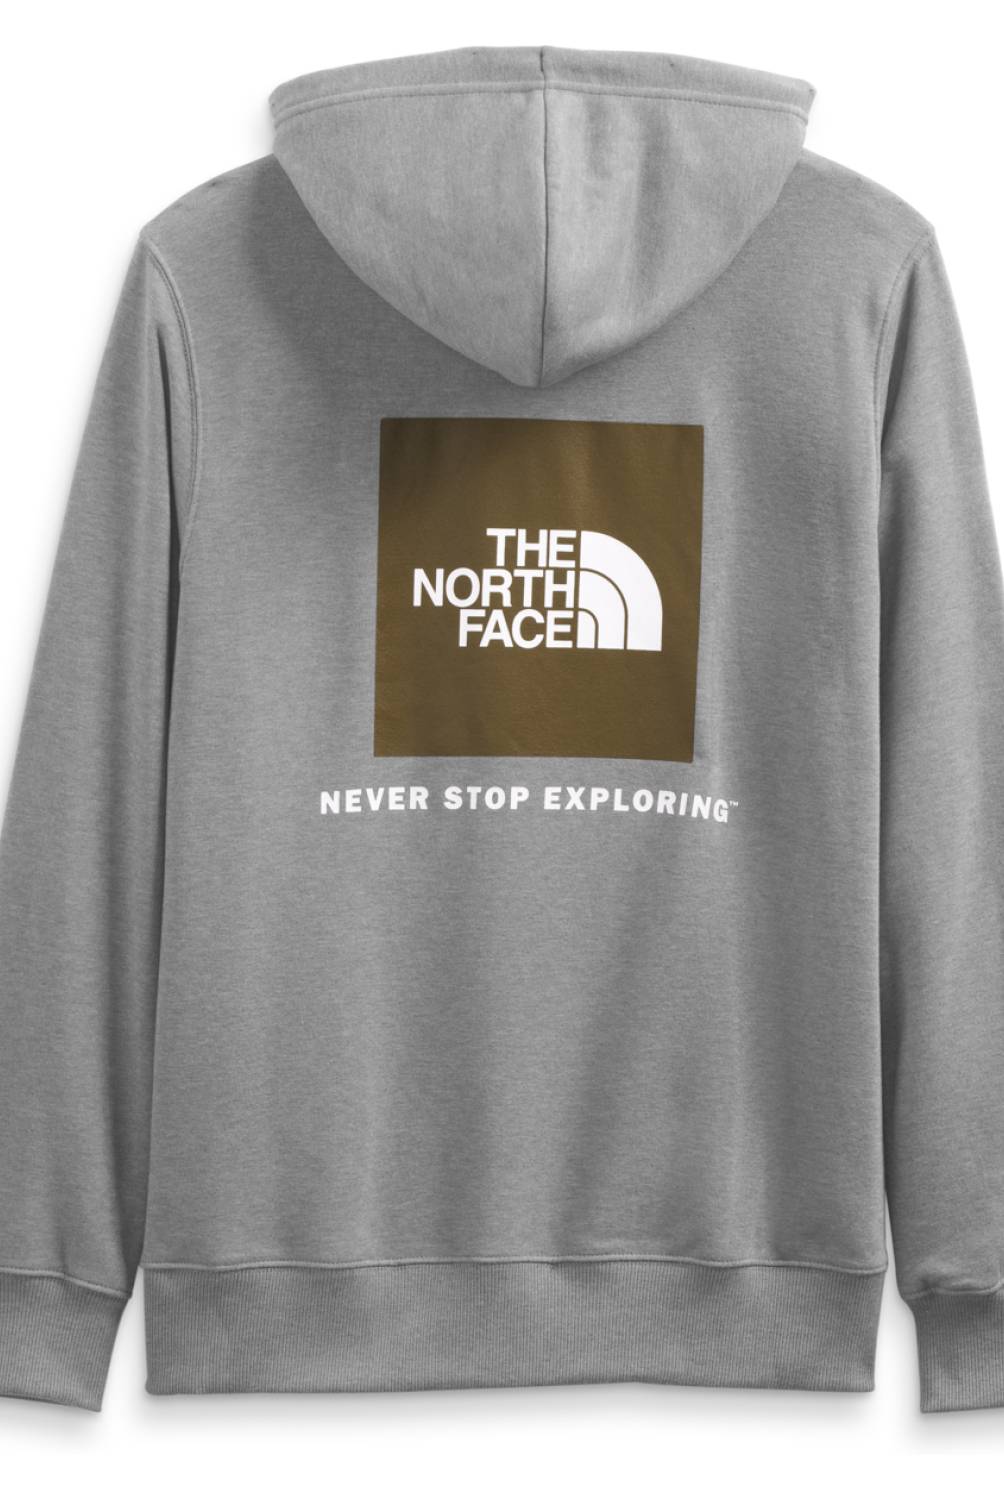 THE NORTH FACE - Polerón Casual Regular Fit Hombre The North Face